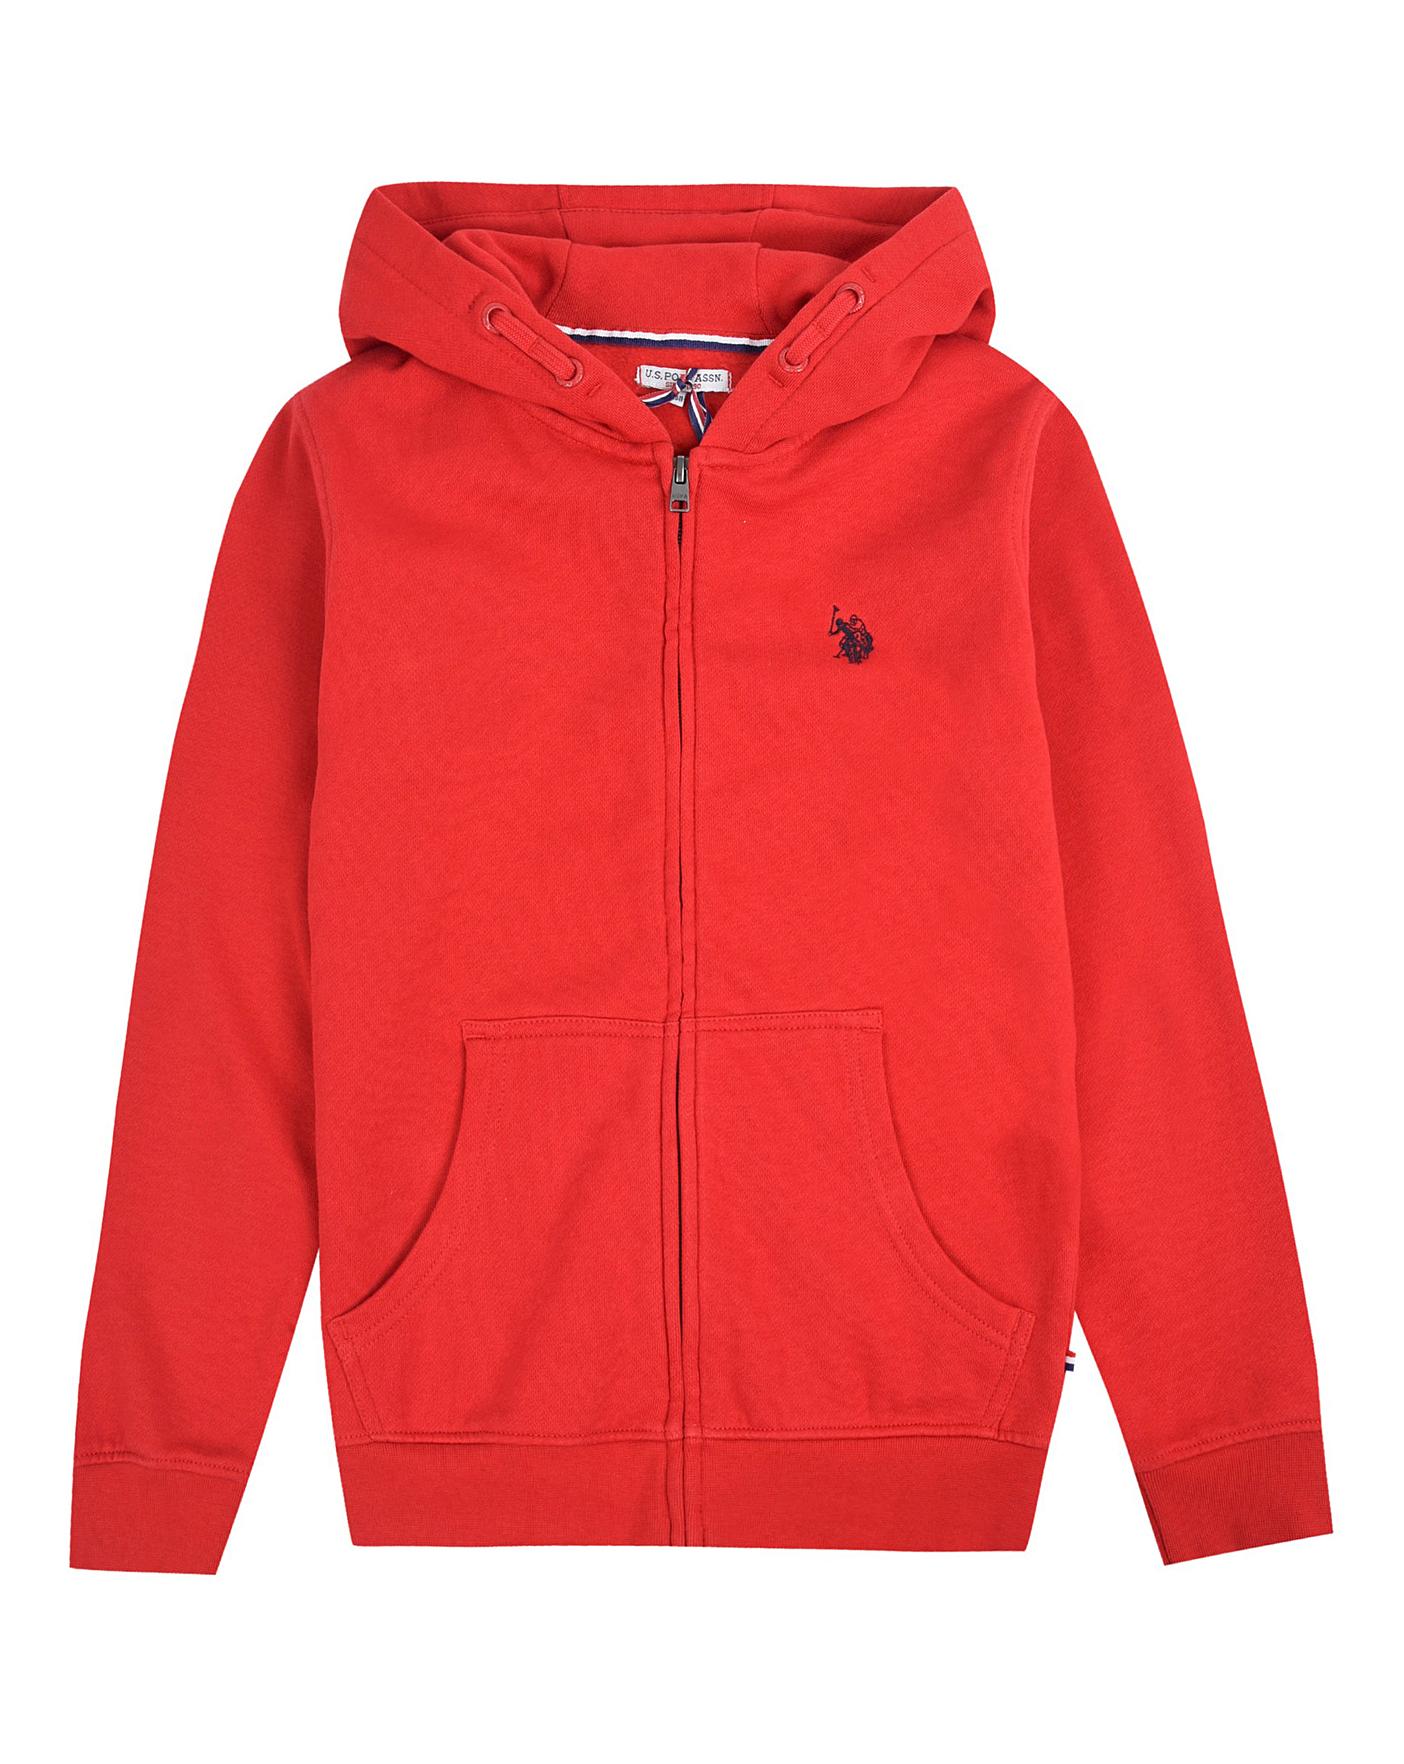 red polo zip up hoodie